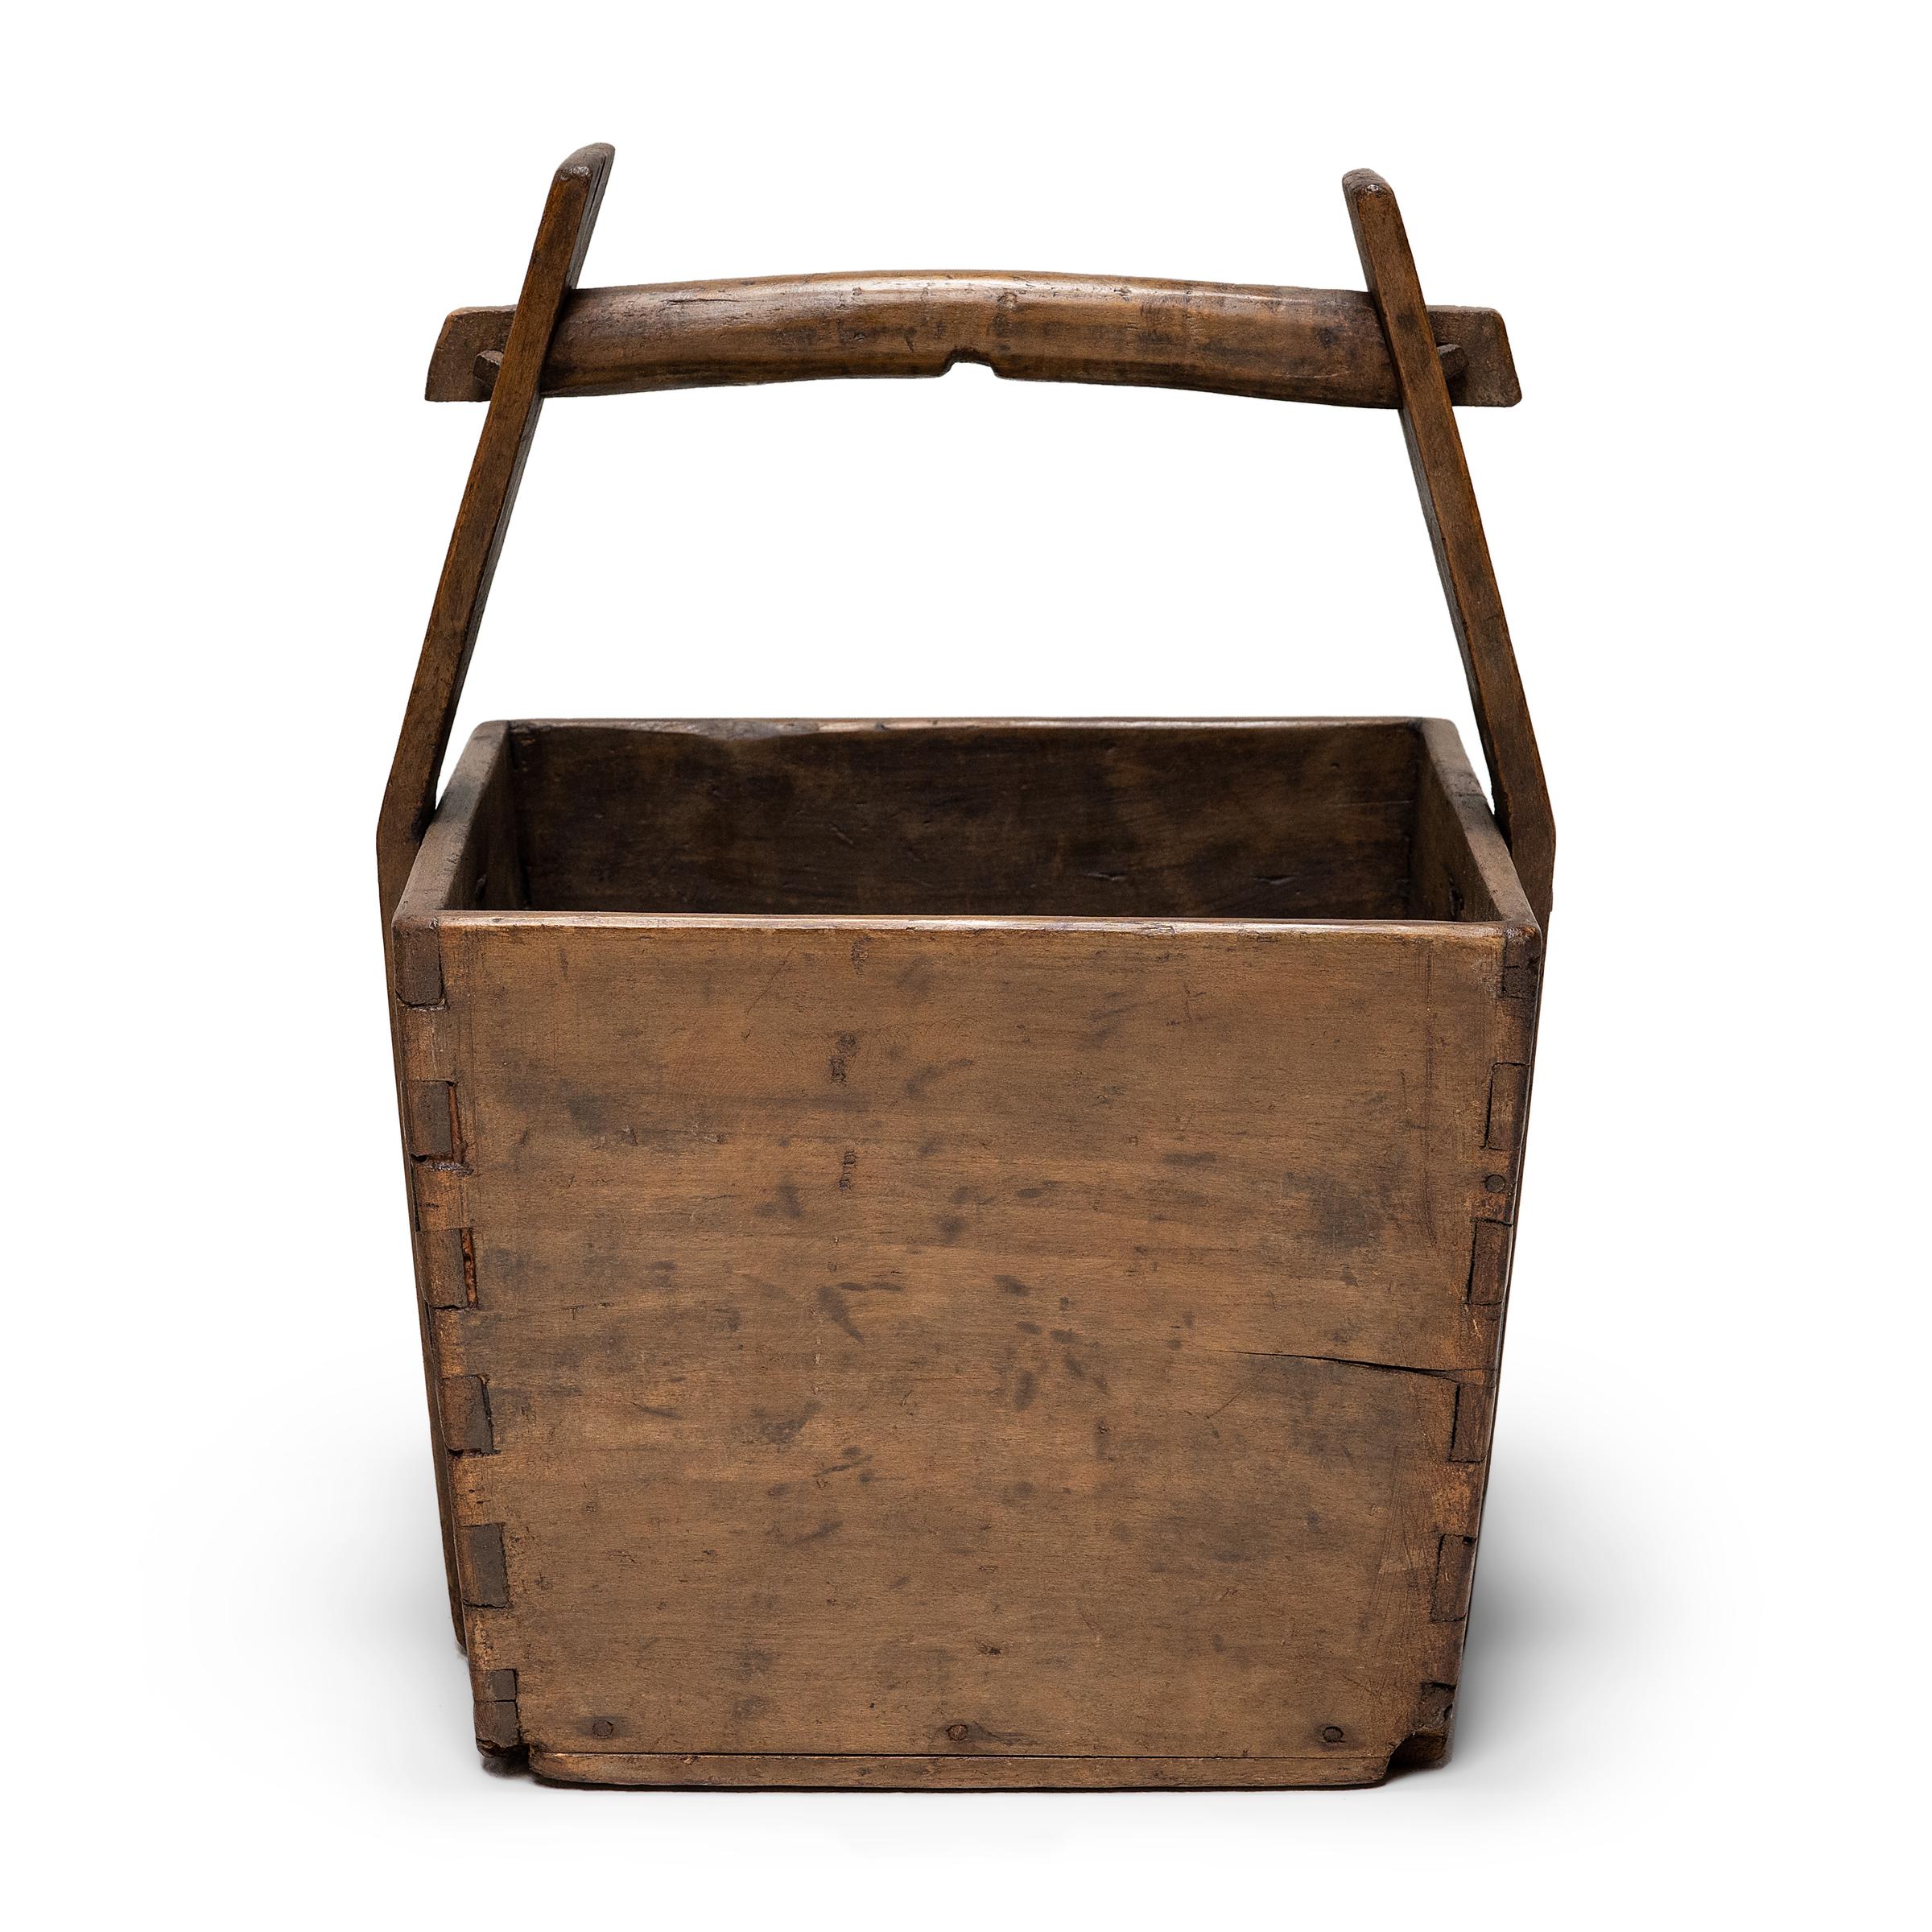 This hand-crafted wooden bucket was once used by farmers in Shanxi, China to transport their harvest of rice and grains over long distances. Counterbalanced by a second container, the pail would have been lifted by a pole threaded through the tall